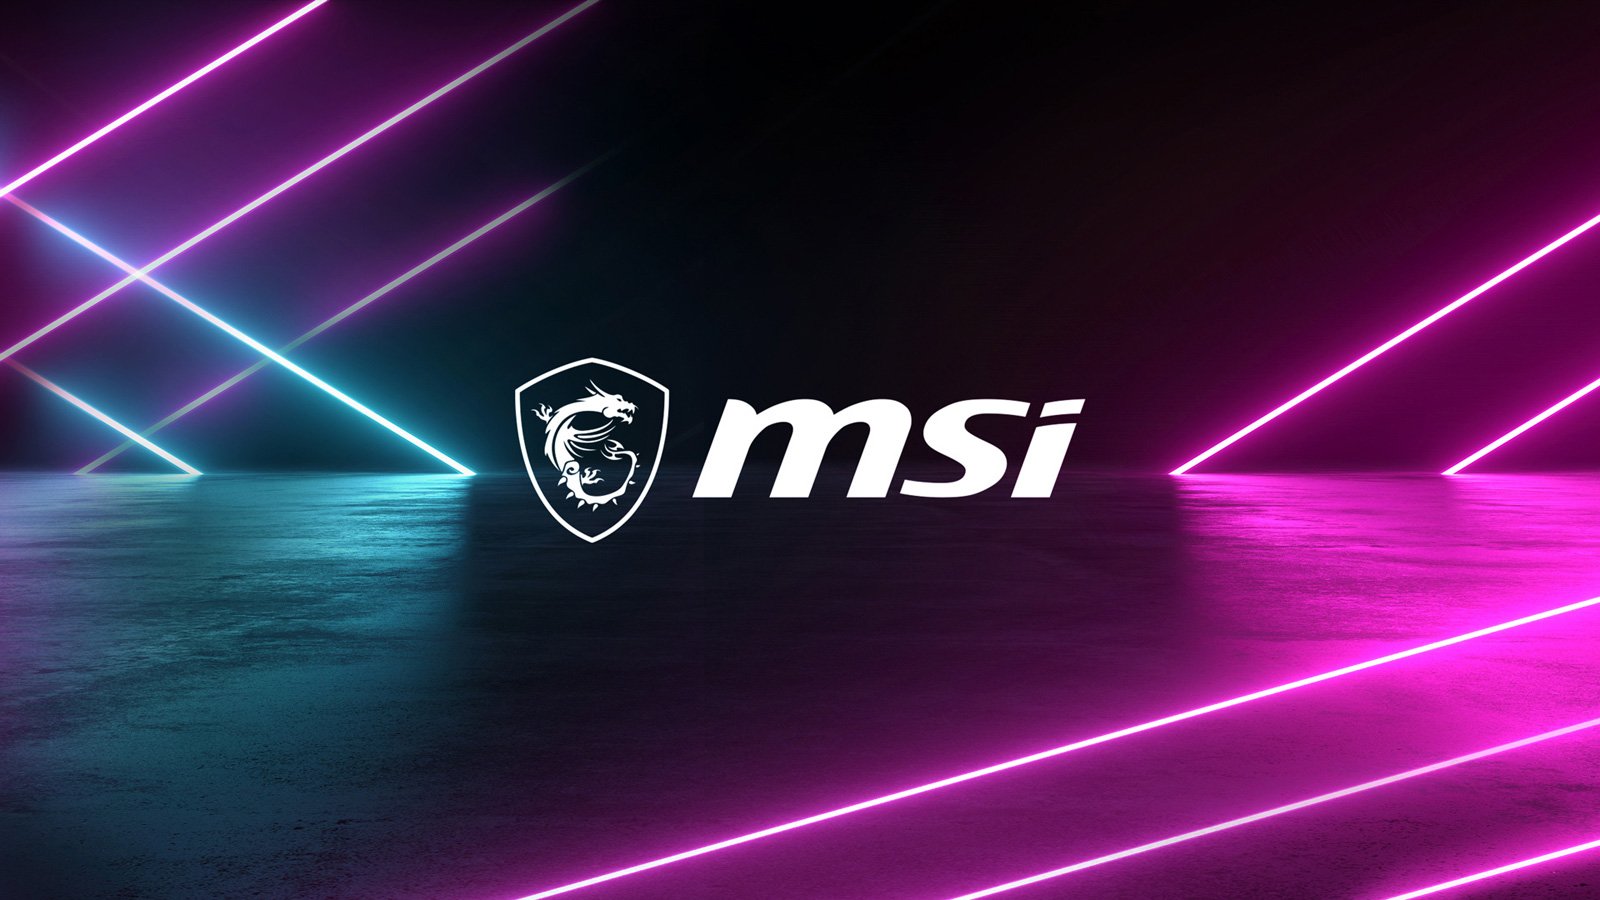 MSI confirms security breach following ransomware attack claims